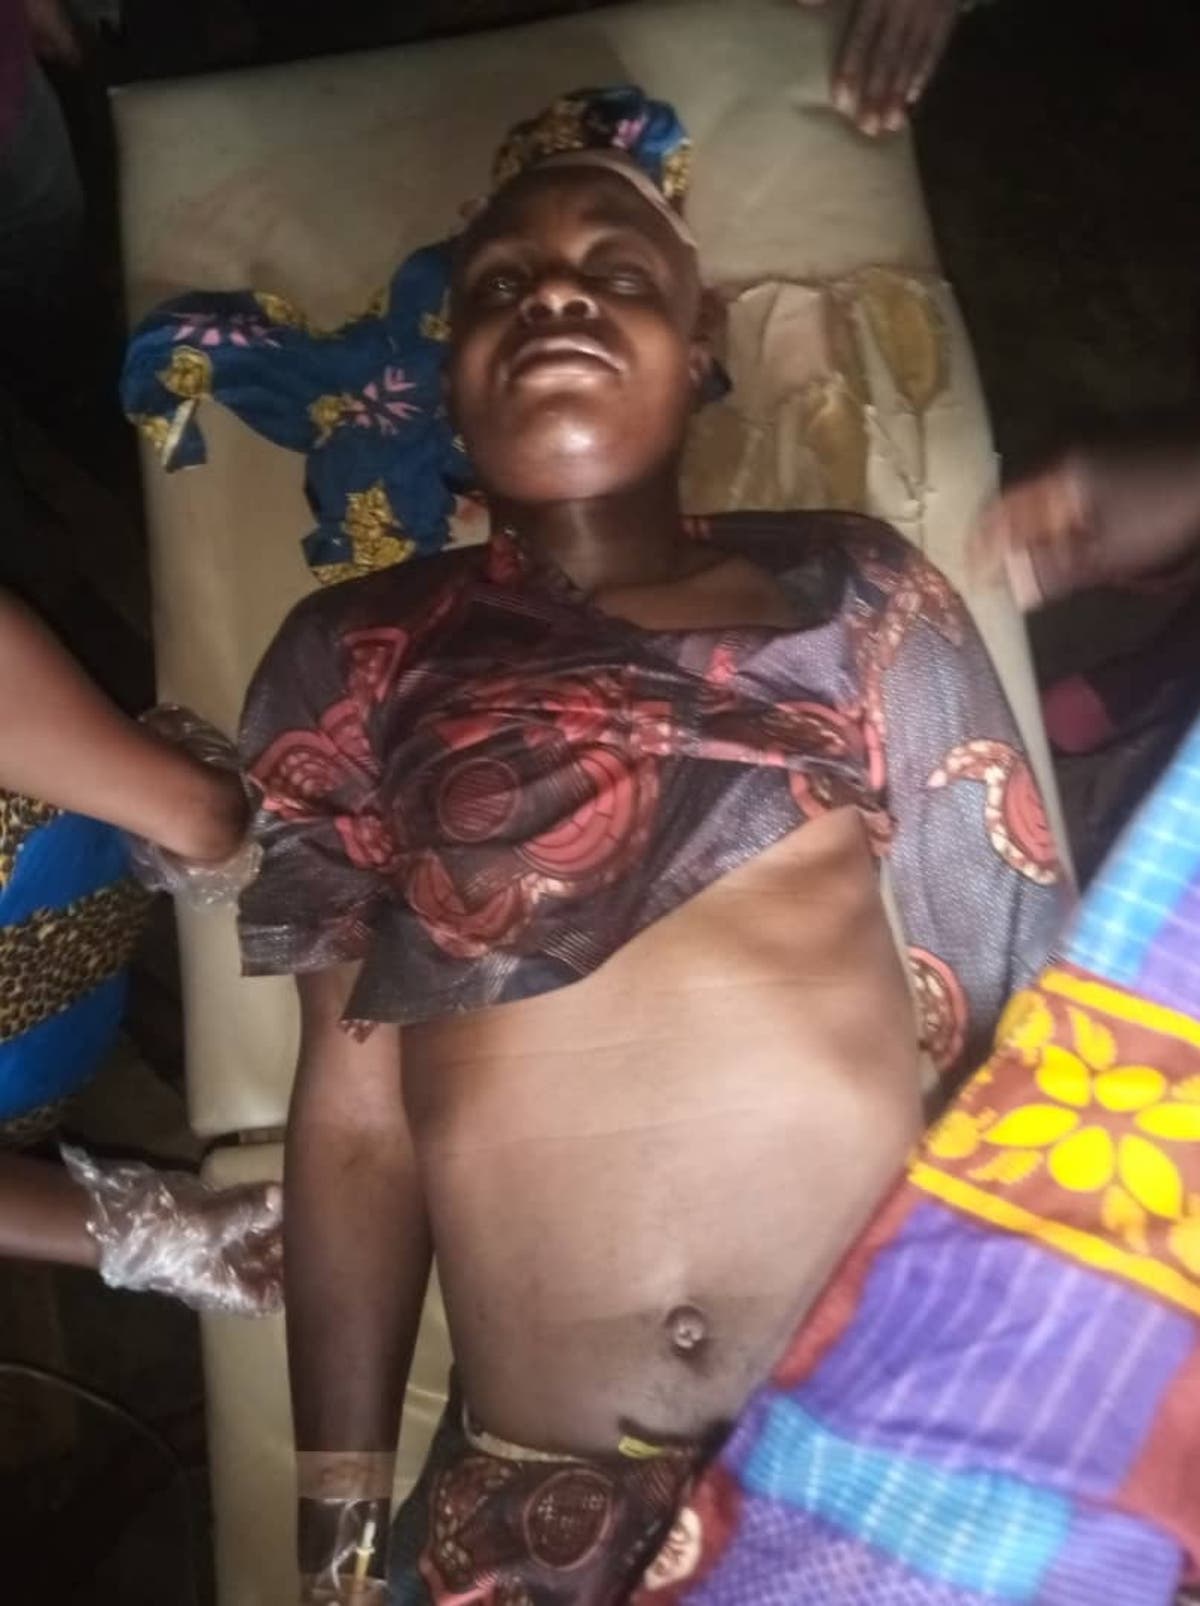 Man goes into coma after hit by Customs' stray bullet in Ogun